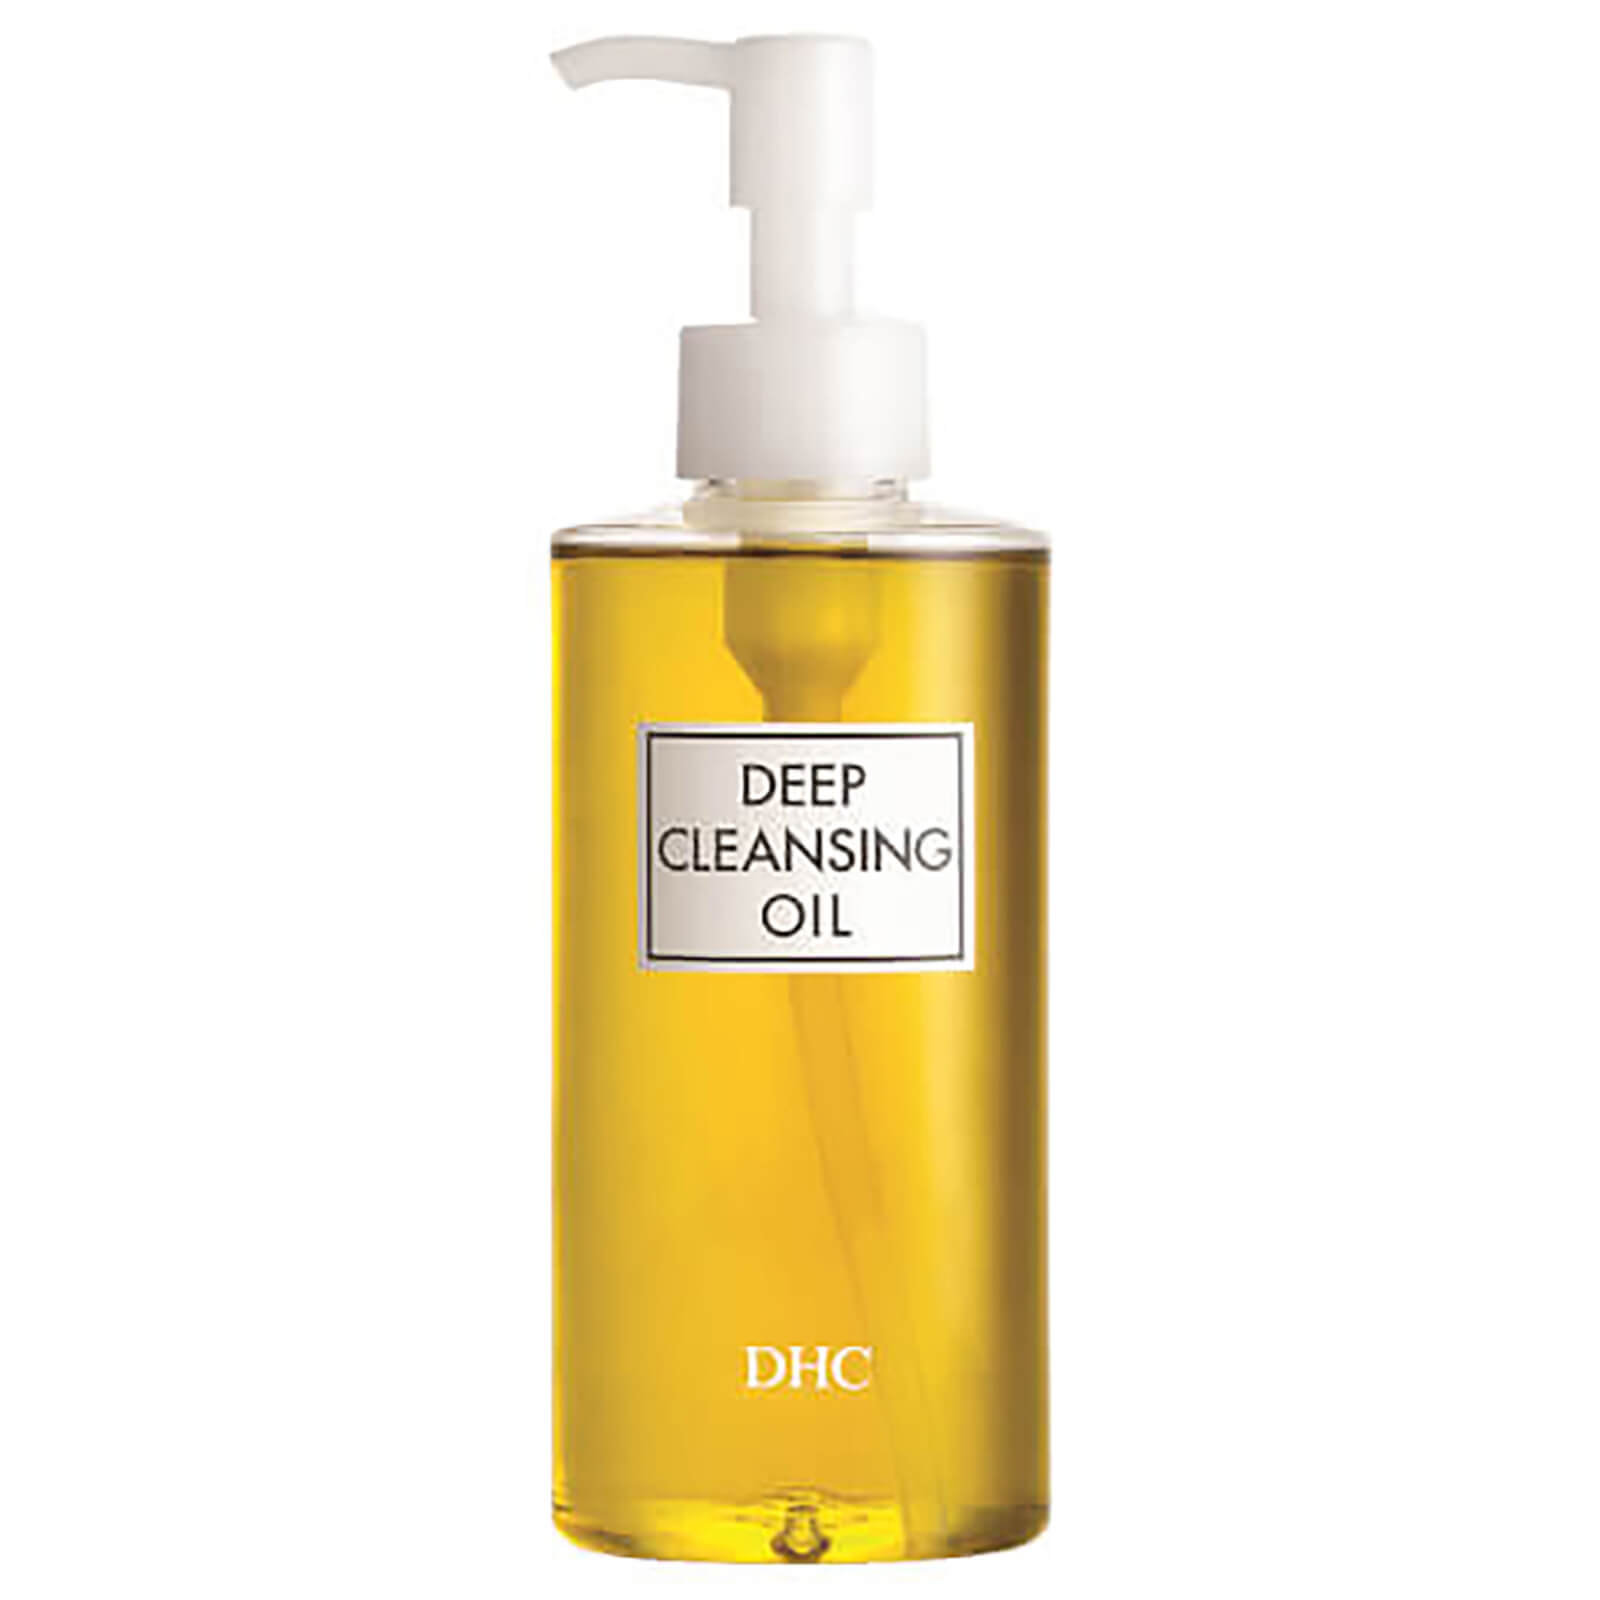 cleaning oil products Facial deep